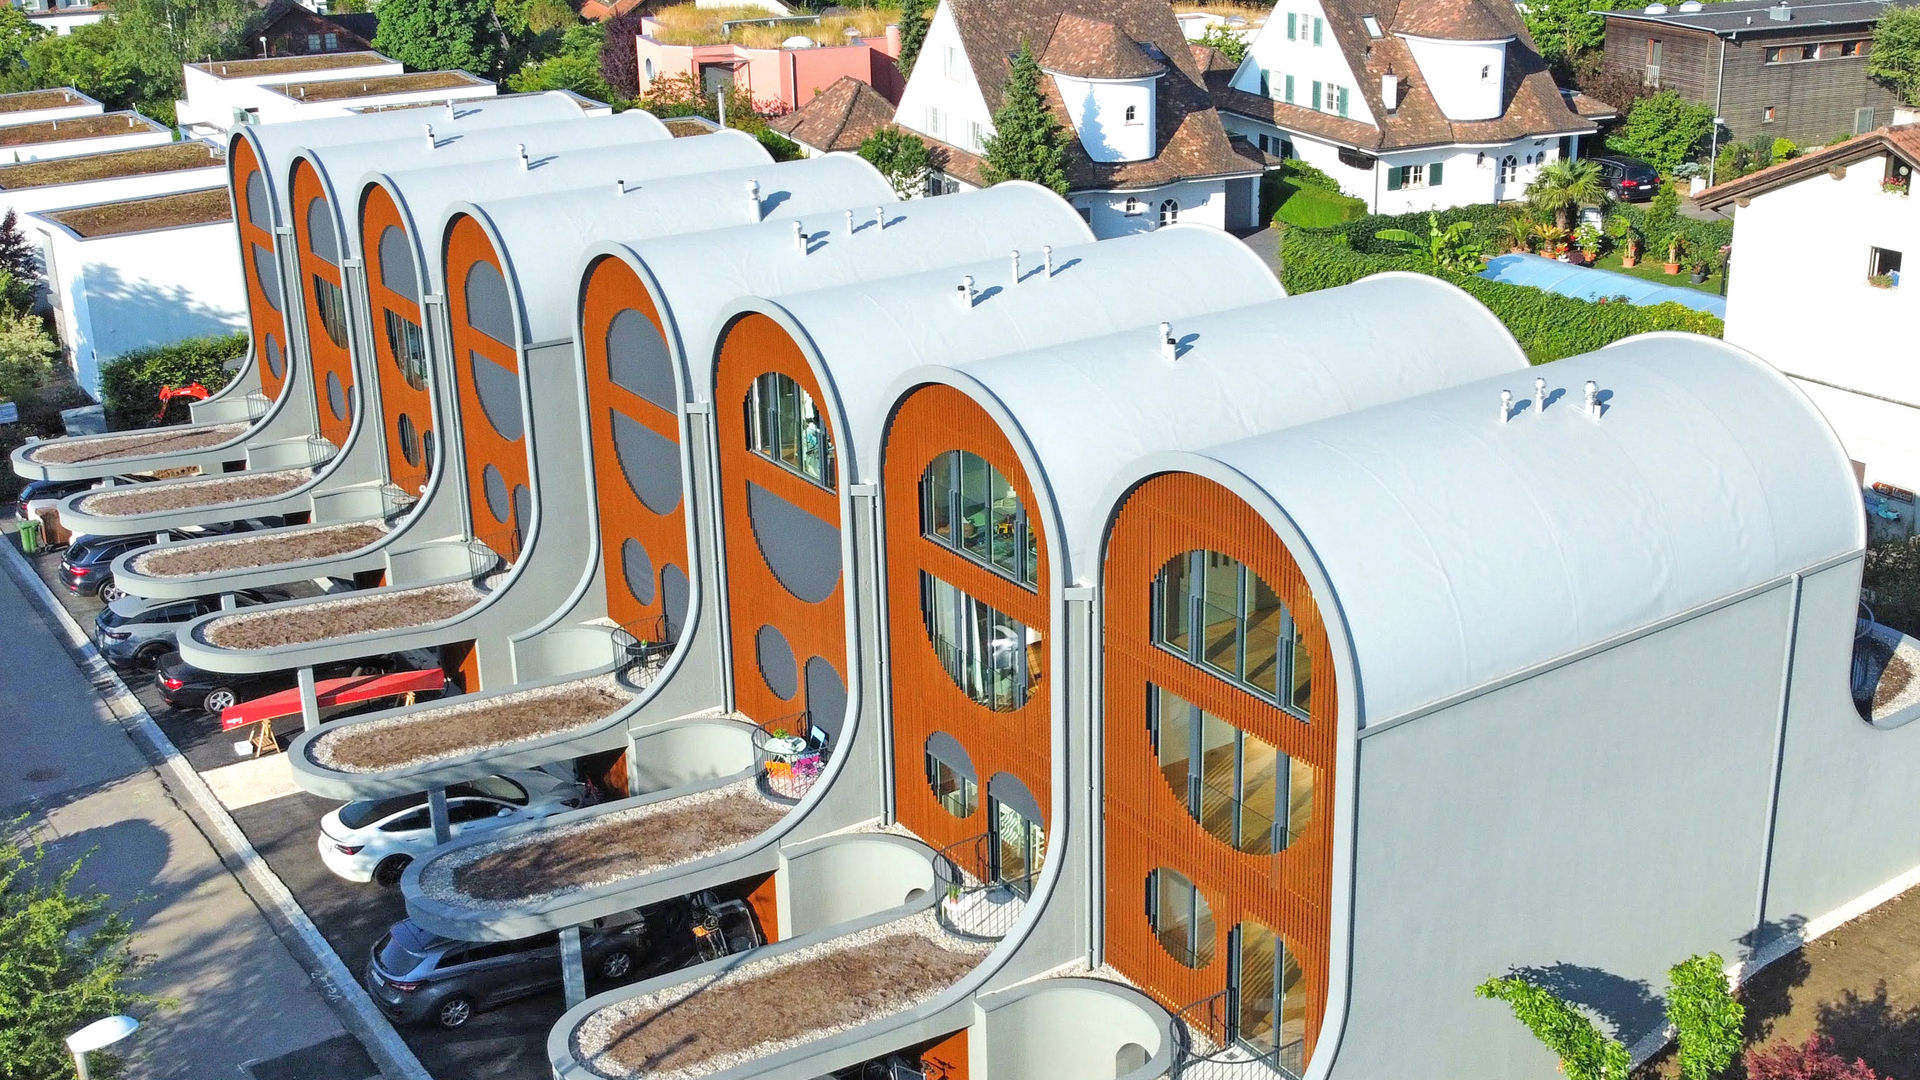 Cloudline townhouse units with curved roofs in Bottmingen, Switzerland using Sarnafil roof membrane